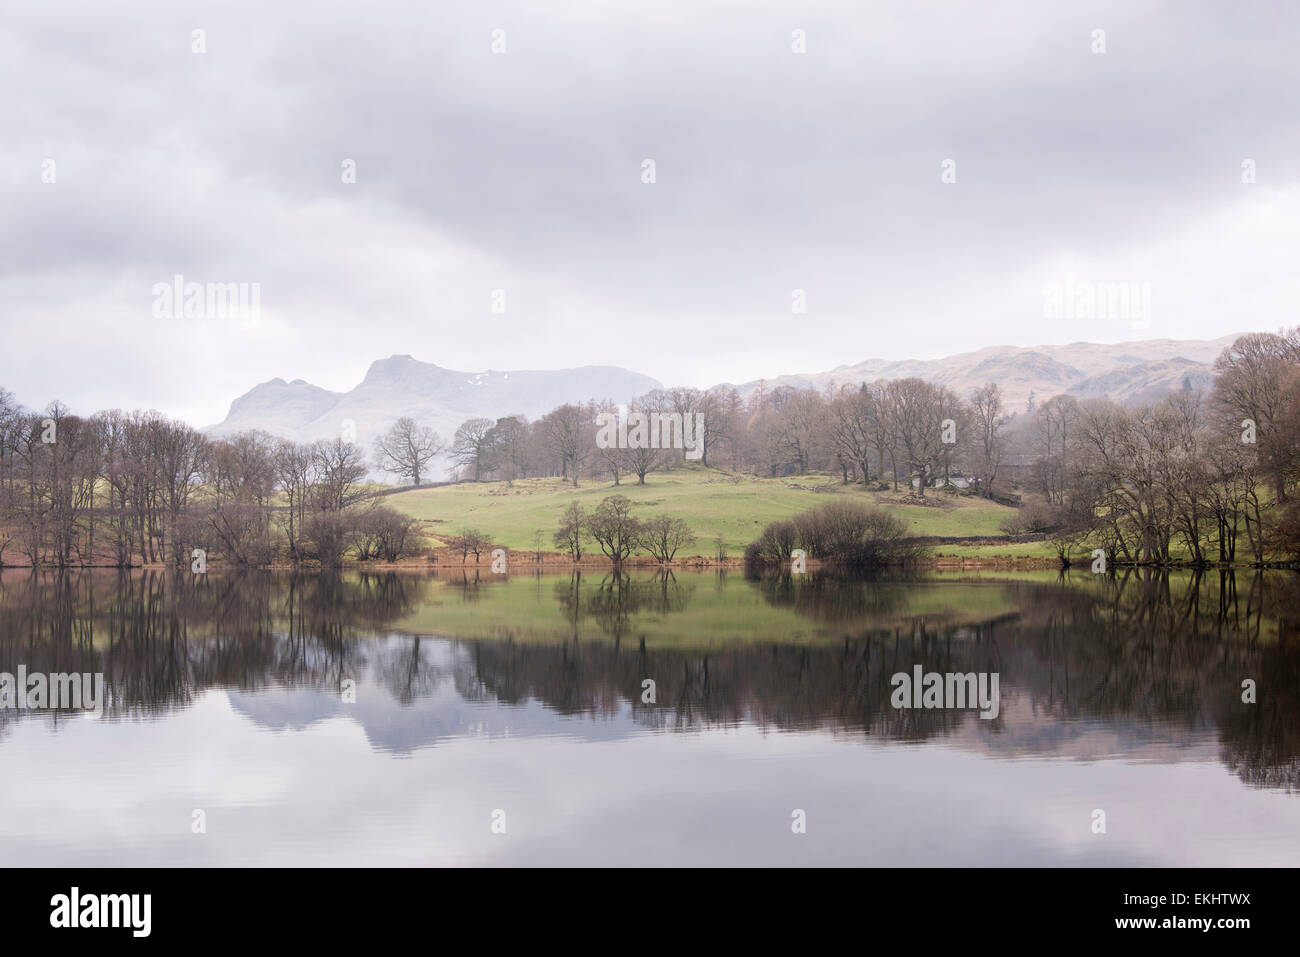 Reflections of trees and the Langdale Pikes in Loughrigg Tarn, Lake District, England Stock Photo